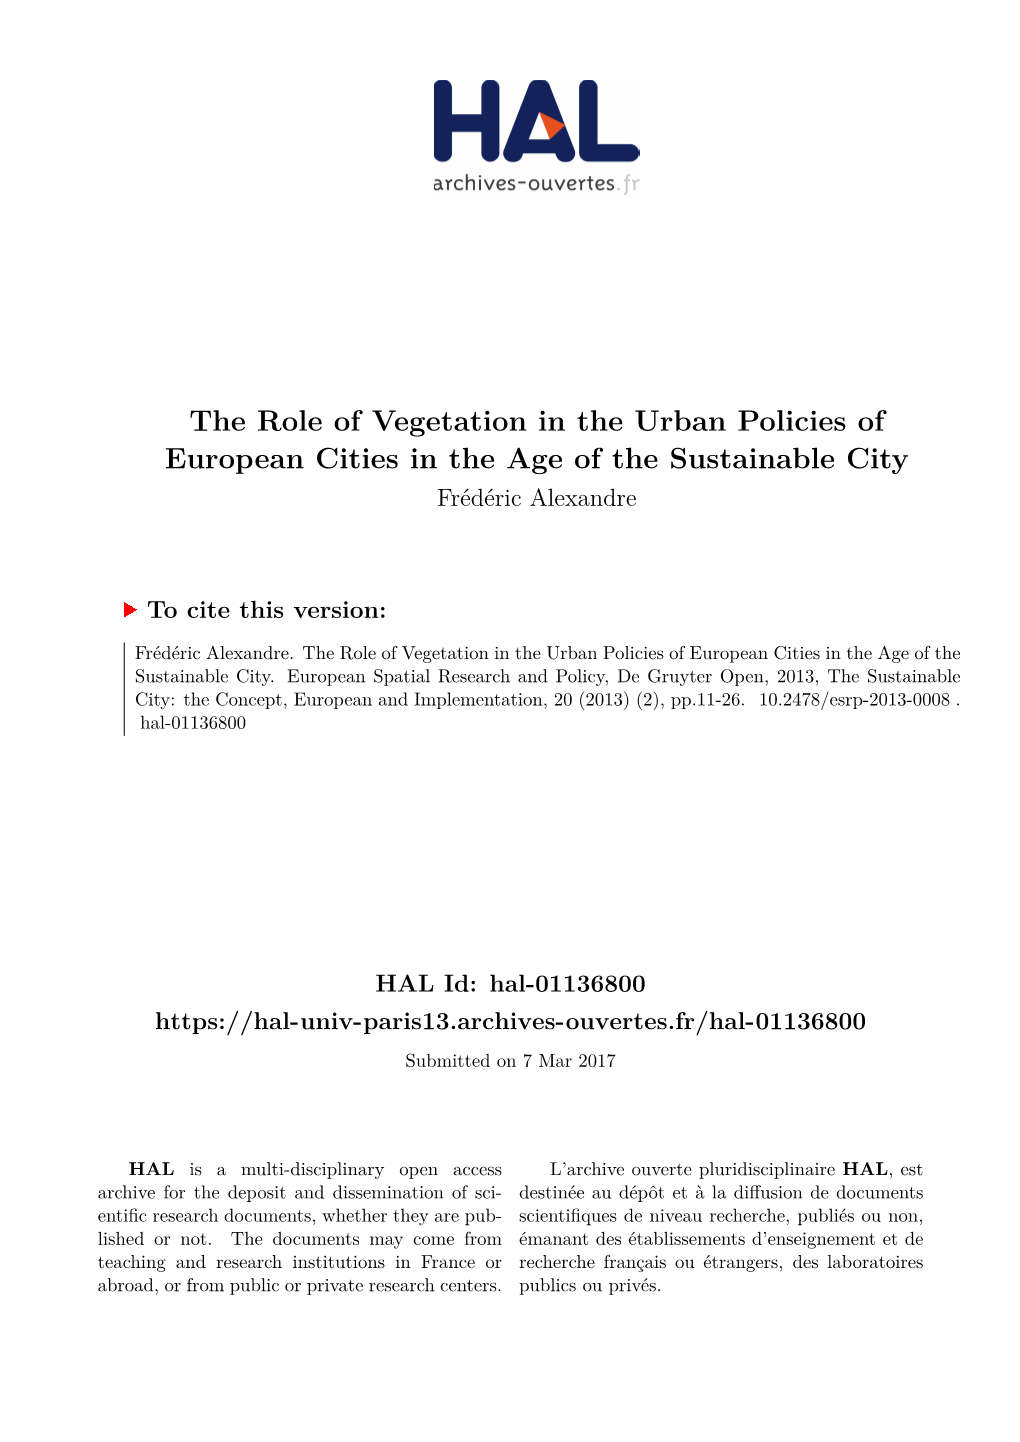 The Role of Vegetation in the Urban Policies of European Cities in the Age of the Sustainable City Frédéric Alexandre